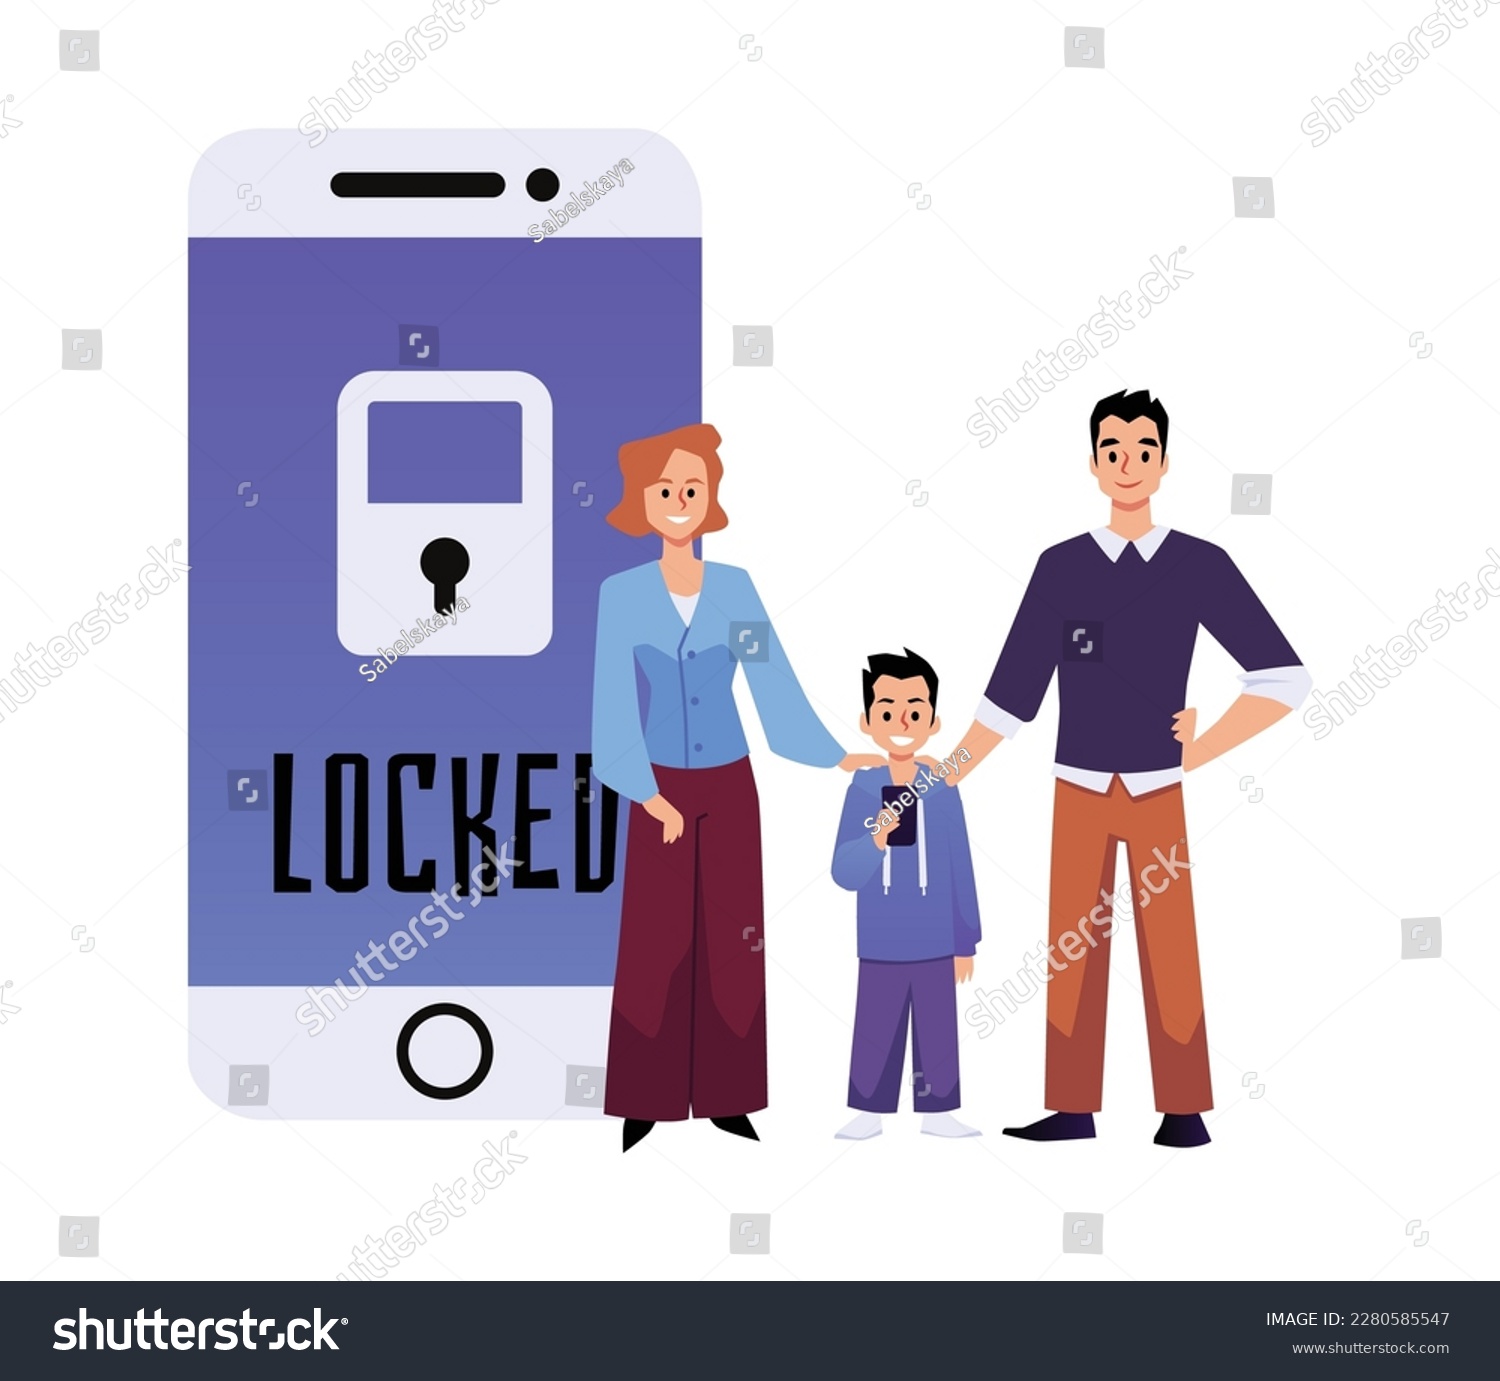 SVG of Parents providing safe internet for child, flat vector illustration isolated on white background. Kids smartphone with locked sign. Restriction of inappropriate content on social media. svg